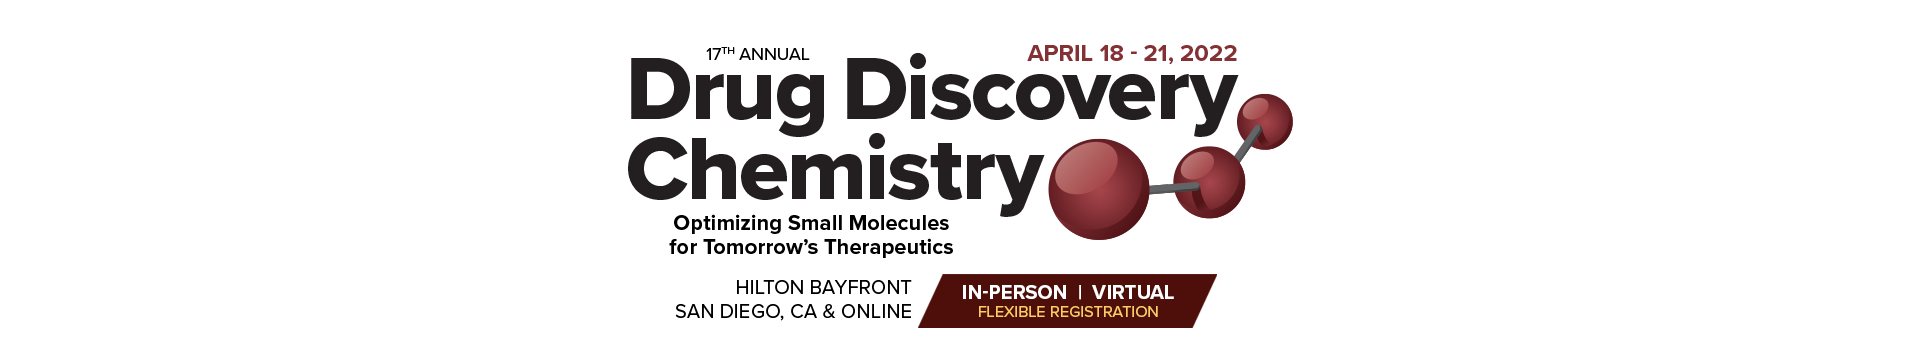 Drug Discovery Chemistry Banner Image